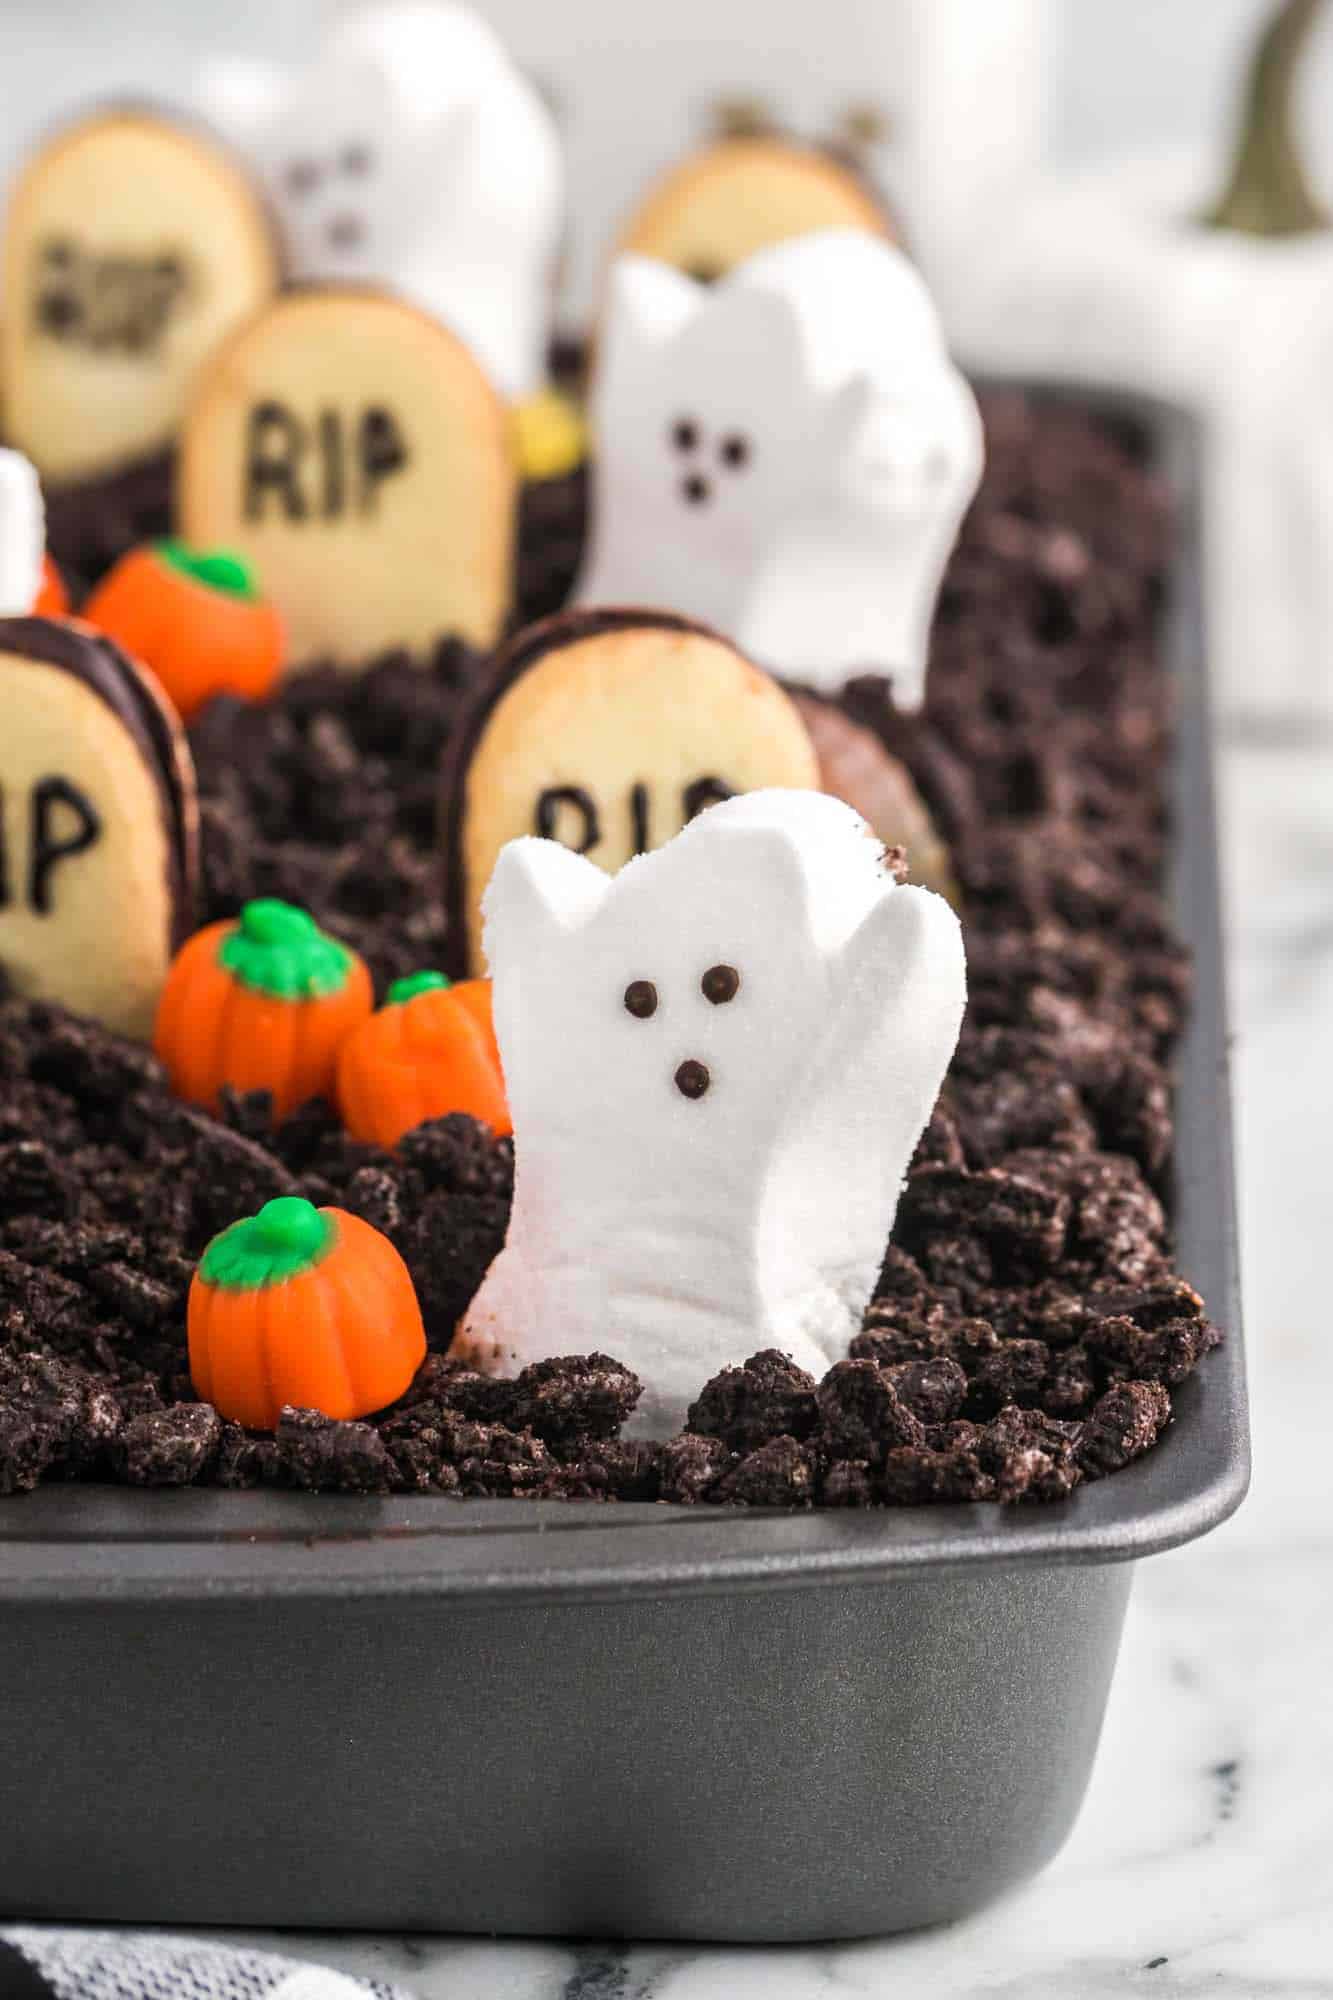 Ghost peeps and candy pumpkins on the dirt cake